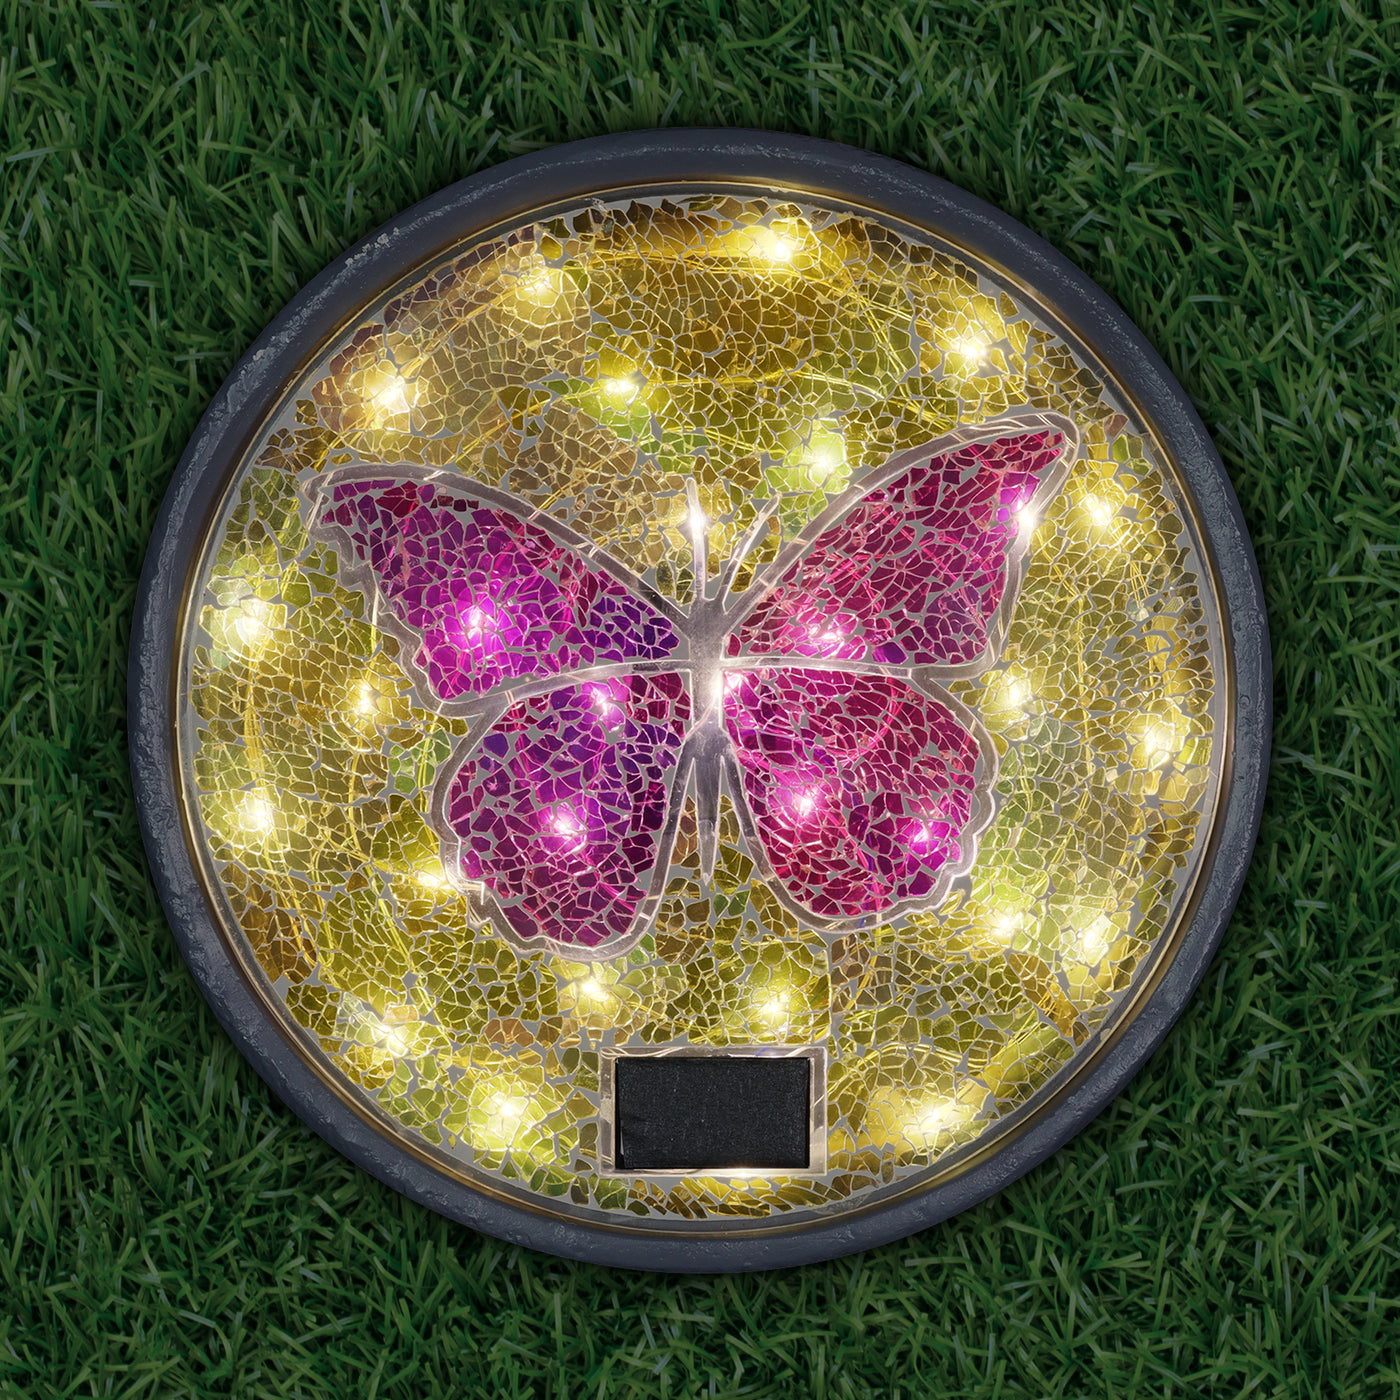 Butterfly Mosaic Stepping Stone Kit